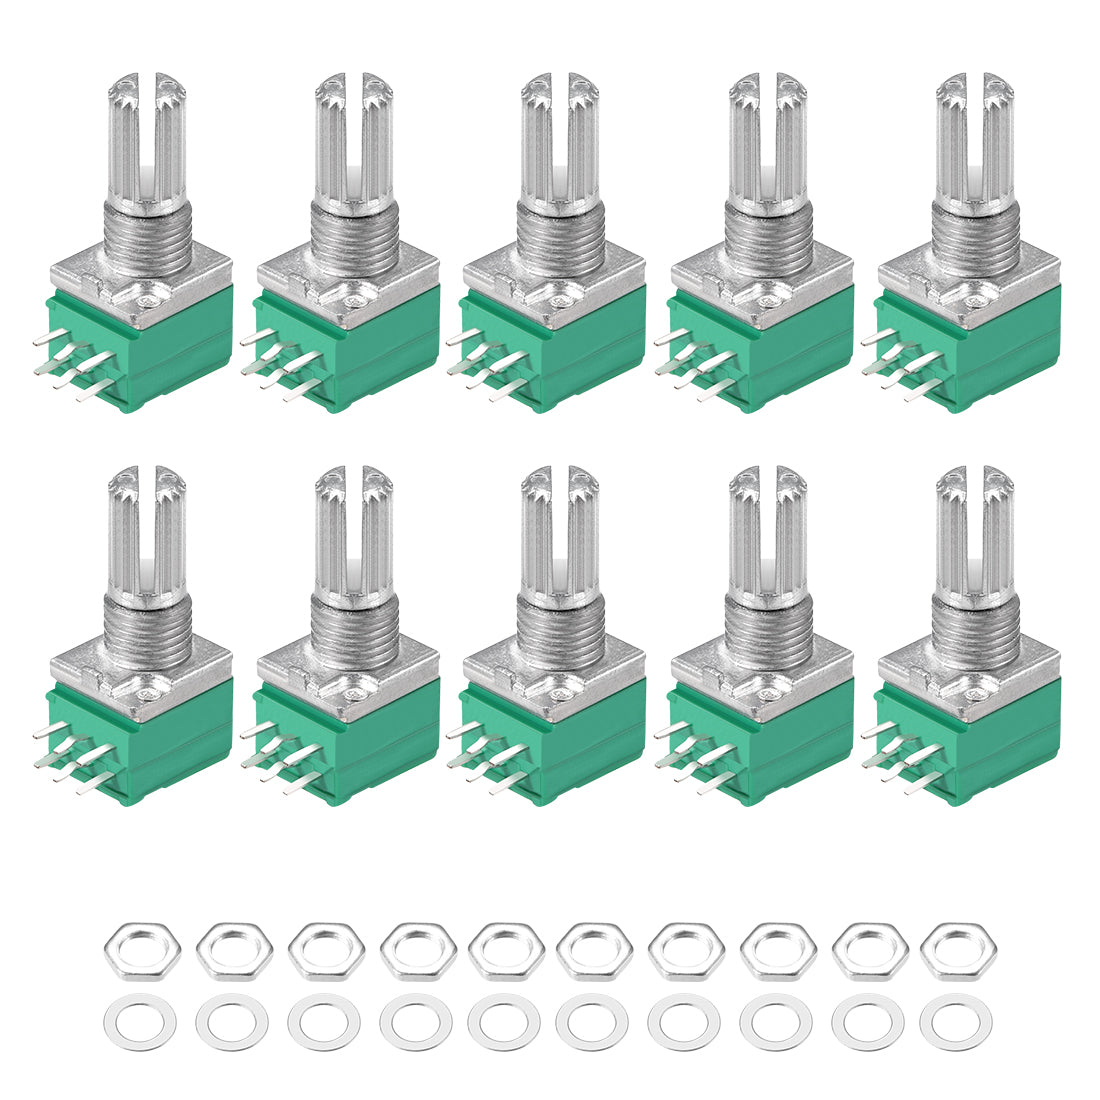 uxcell Uxcell Potentiometer  B5K Ohm Variable Resistors Double Turn Rotary Carbon Film Taper RV097NS 10pcs